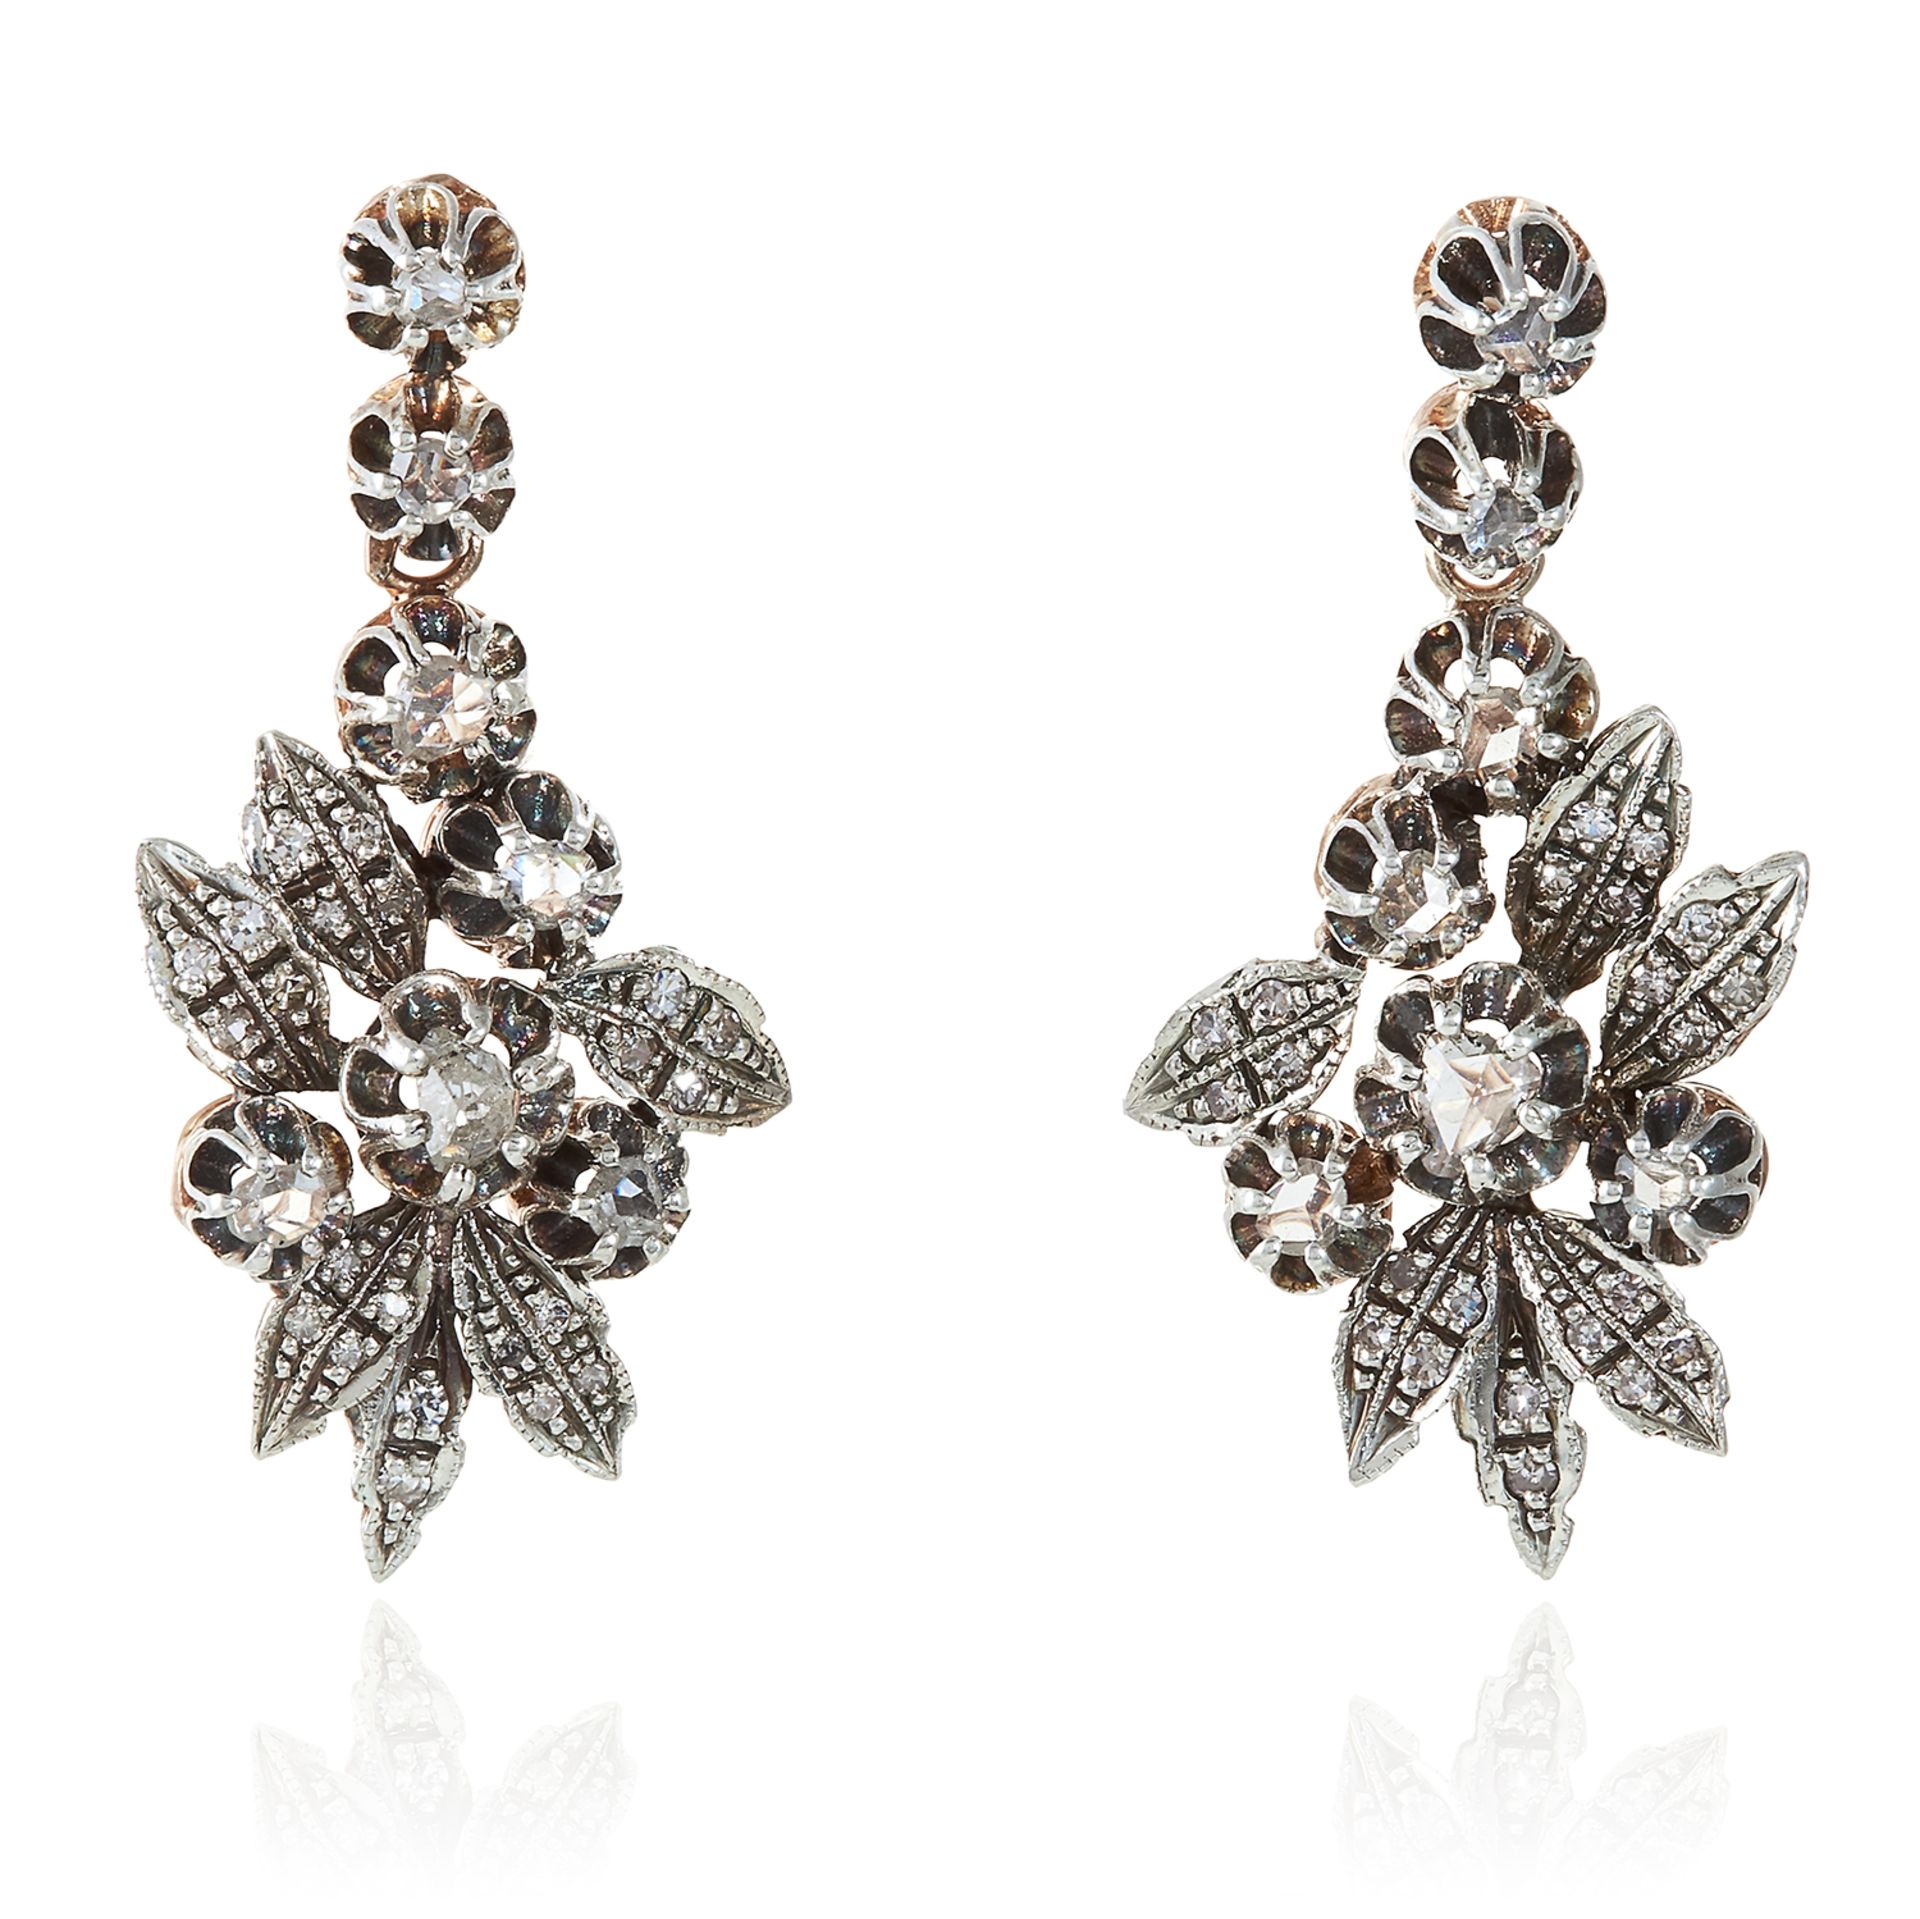 A PAIR OF ANTIQUE DIAMOND EARRINGS in high carat yellow gold and silver, designed as floral